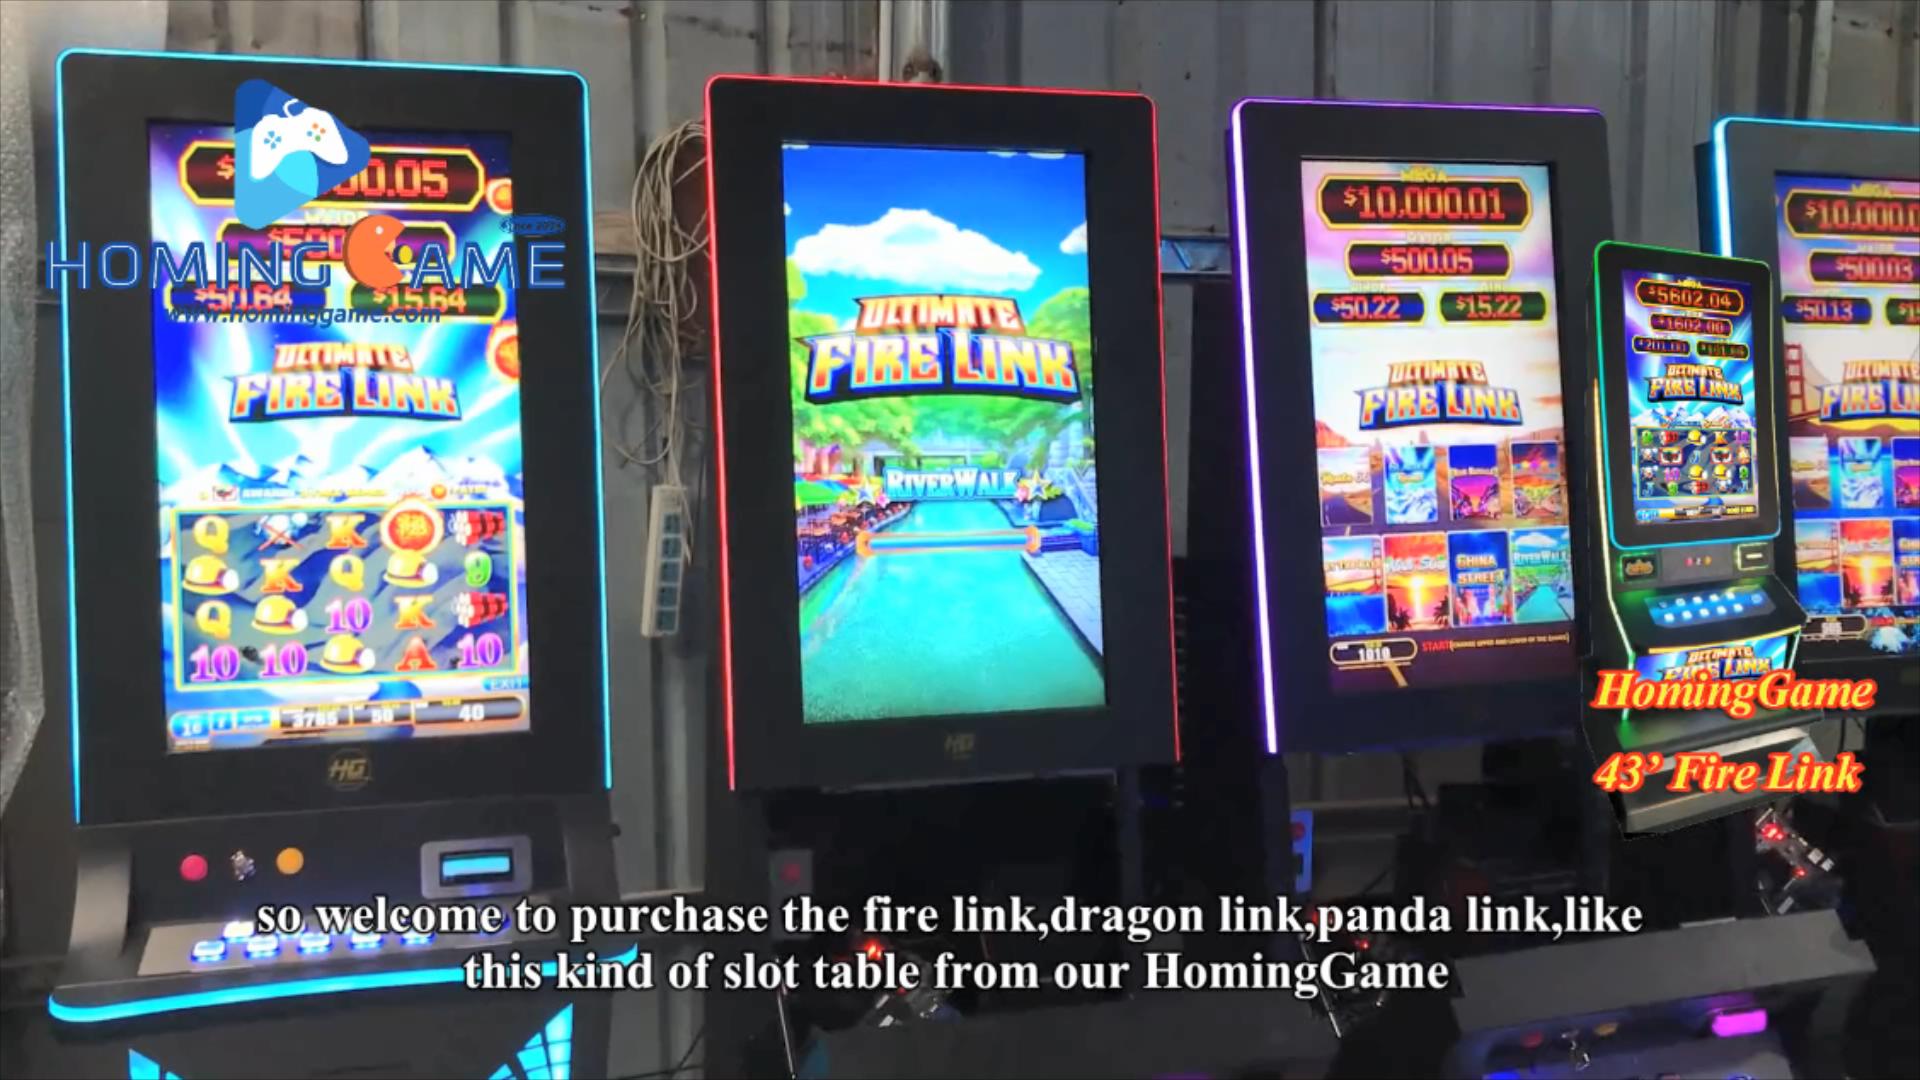 2021 HomingGame Top Sale 32' 43' Touch Monitor 8 in 1 Fire Link Slot Table Game Machine Can Connect the Mutha Goose and Gaggle Ticket System(Order Call Whatsapp:+8618688409495),43' touch monitor 8 in 1 fire link slot table game machine,32' touch monitor 8 in 1 fire link slot table game machine,fire link slot table game,,ultimate fire link,ultimate fire link slot game machine,ultimate fire link slot game,fire link slot game machine,fire link,ultimate fire link slot gaming machine,ultimate fire link slot table gaming machine,slot game,slot table game,slot gaming machine,game machine,arcade game machine,coin operated game machine,arcade game machine for sale,amsuement machine,entertainment game machine,family entertainment game machine,hominggame,www.gametube.hk,indoor game machine,casino,gambling machine,electrical game machine,slot,slot game machine for sale,slot table for sale,simulator game machine,video game machine,video game,video game machine for sale,hominggame fire link slot game,slot gaming